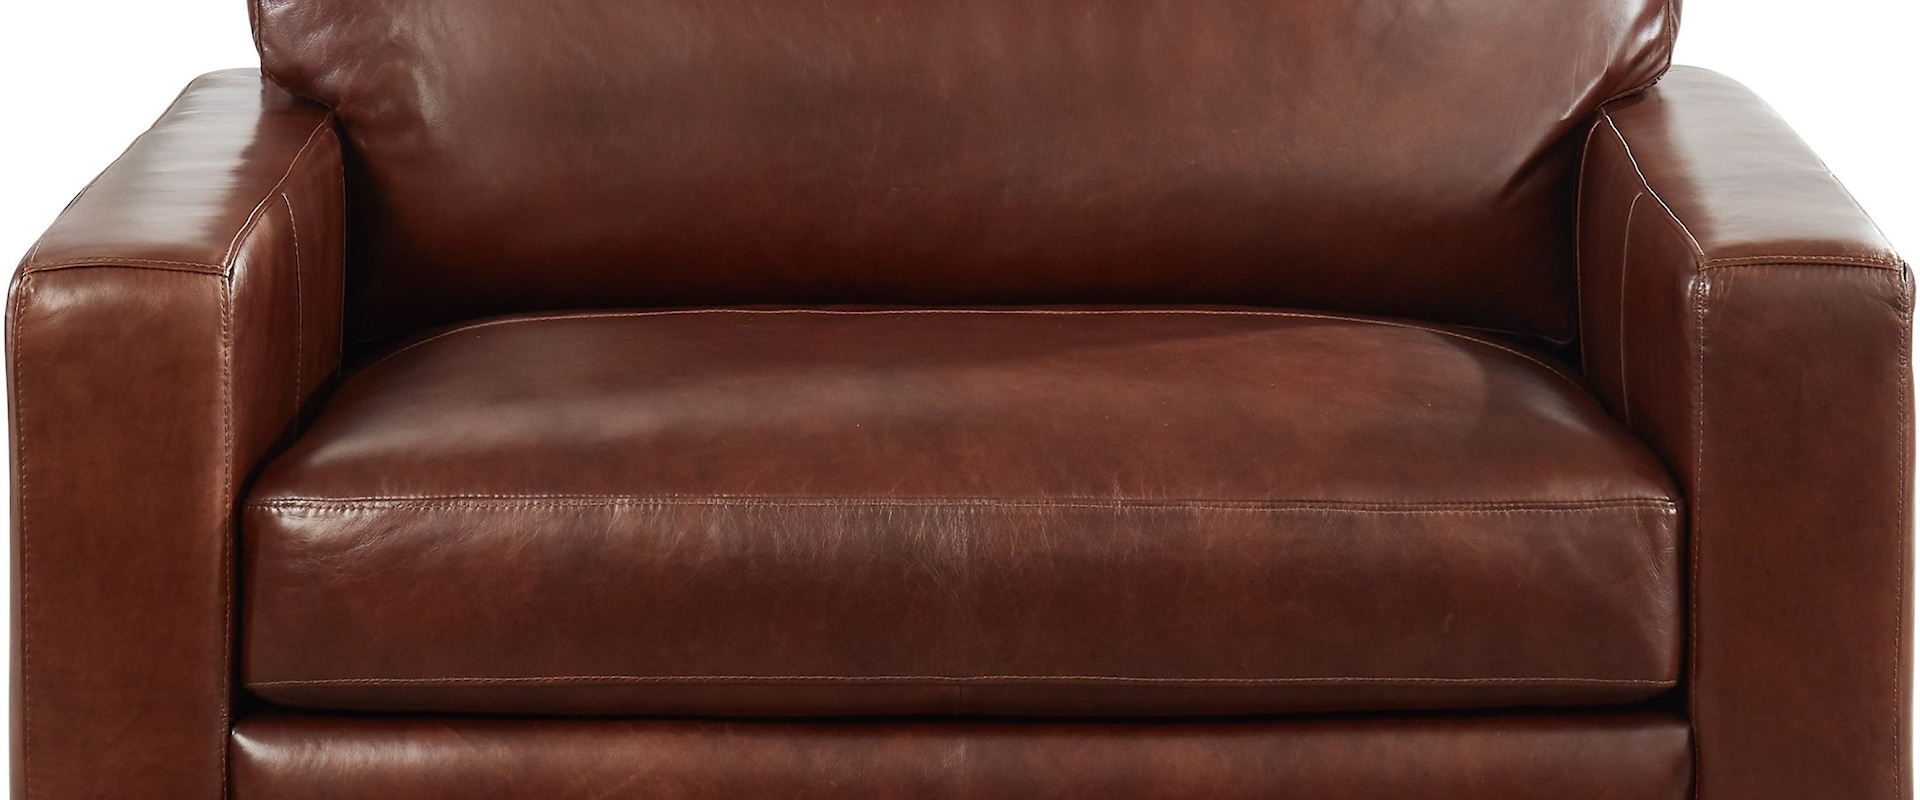 Contemporary Leather Chair 1/2 with Ottoman